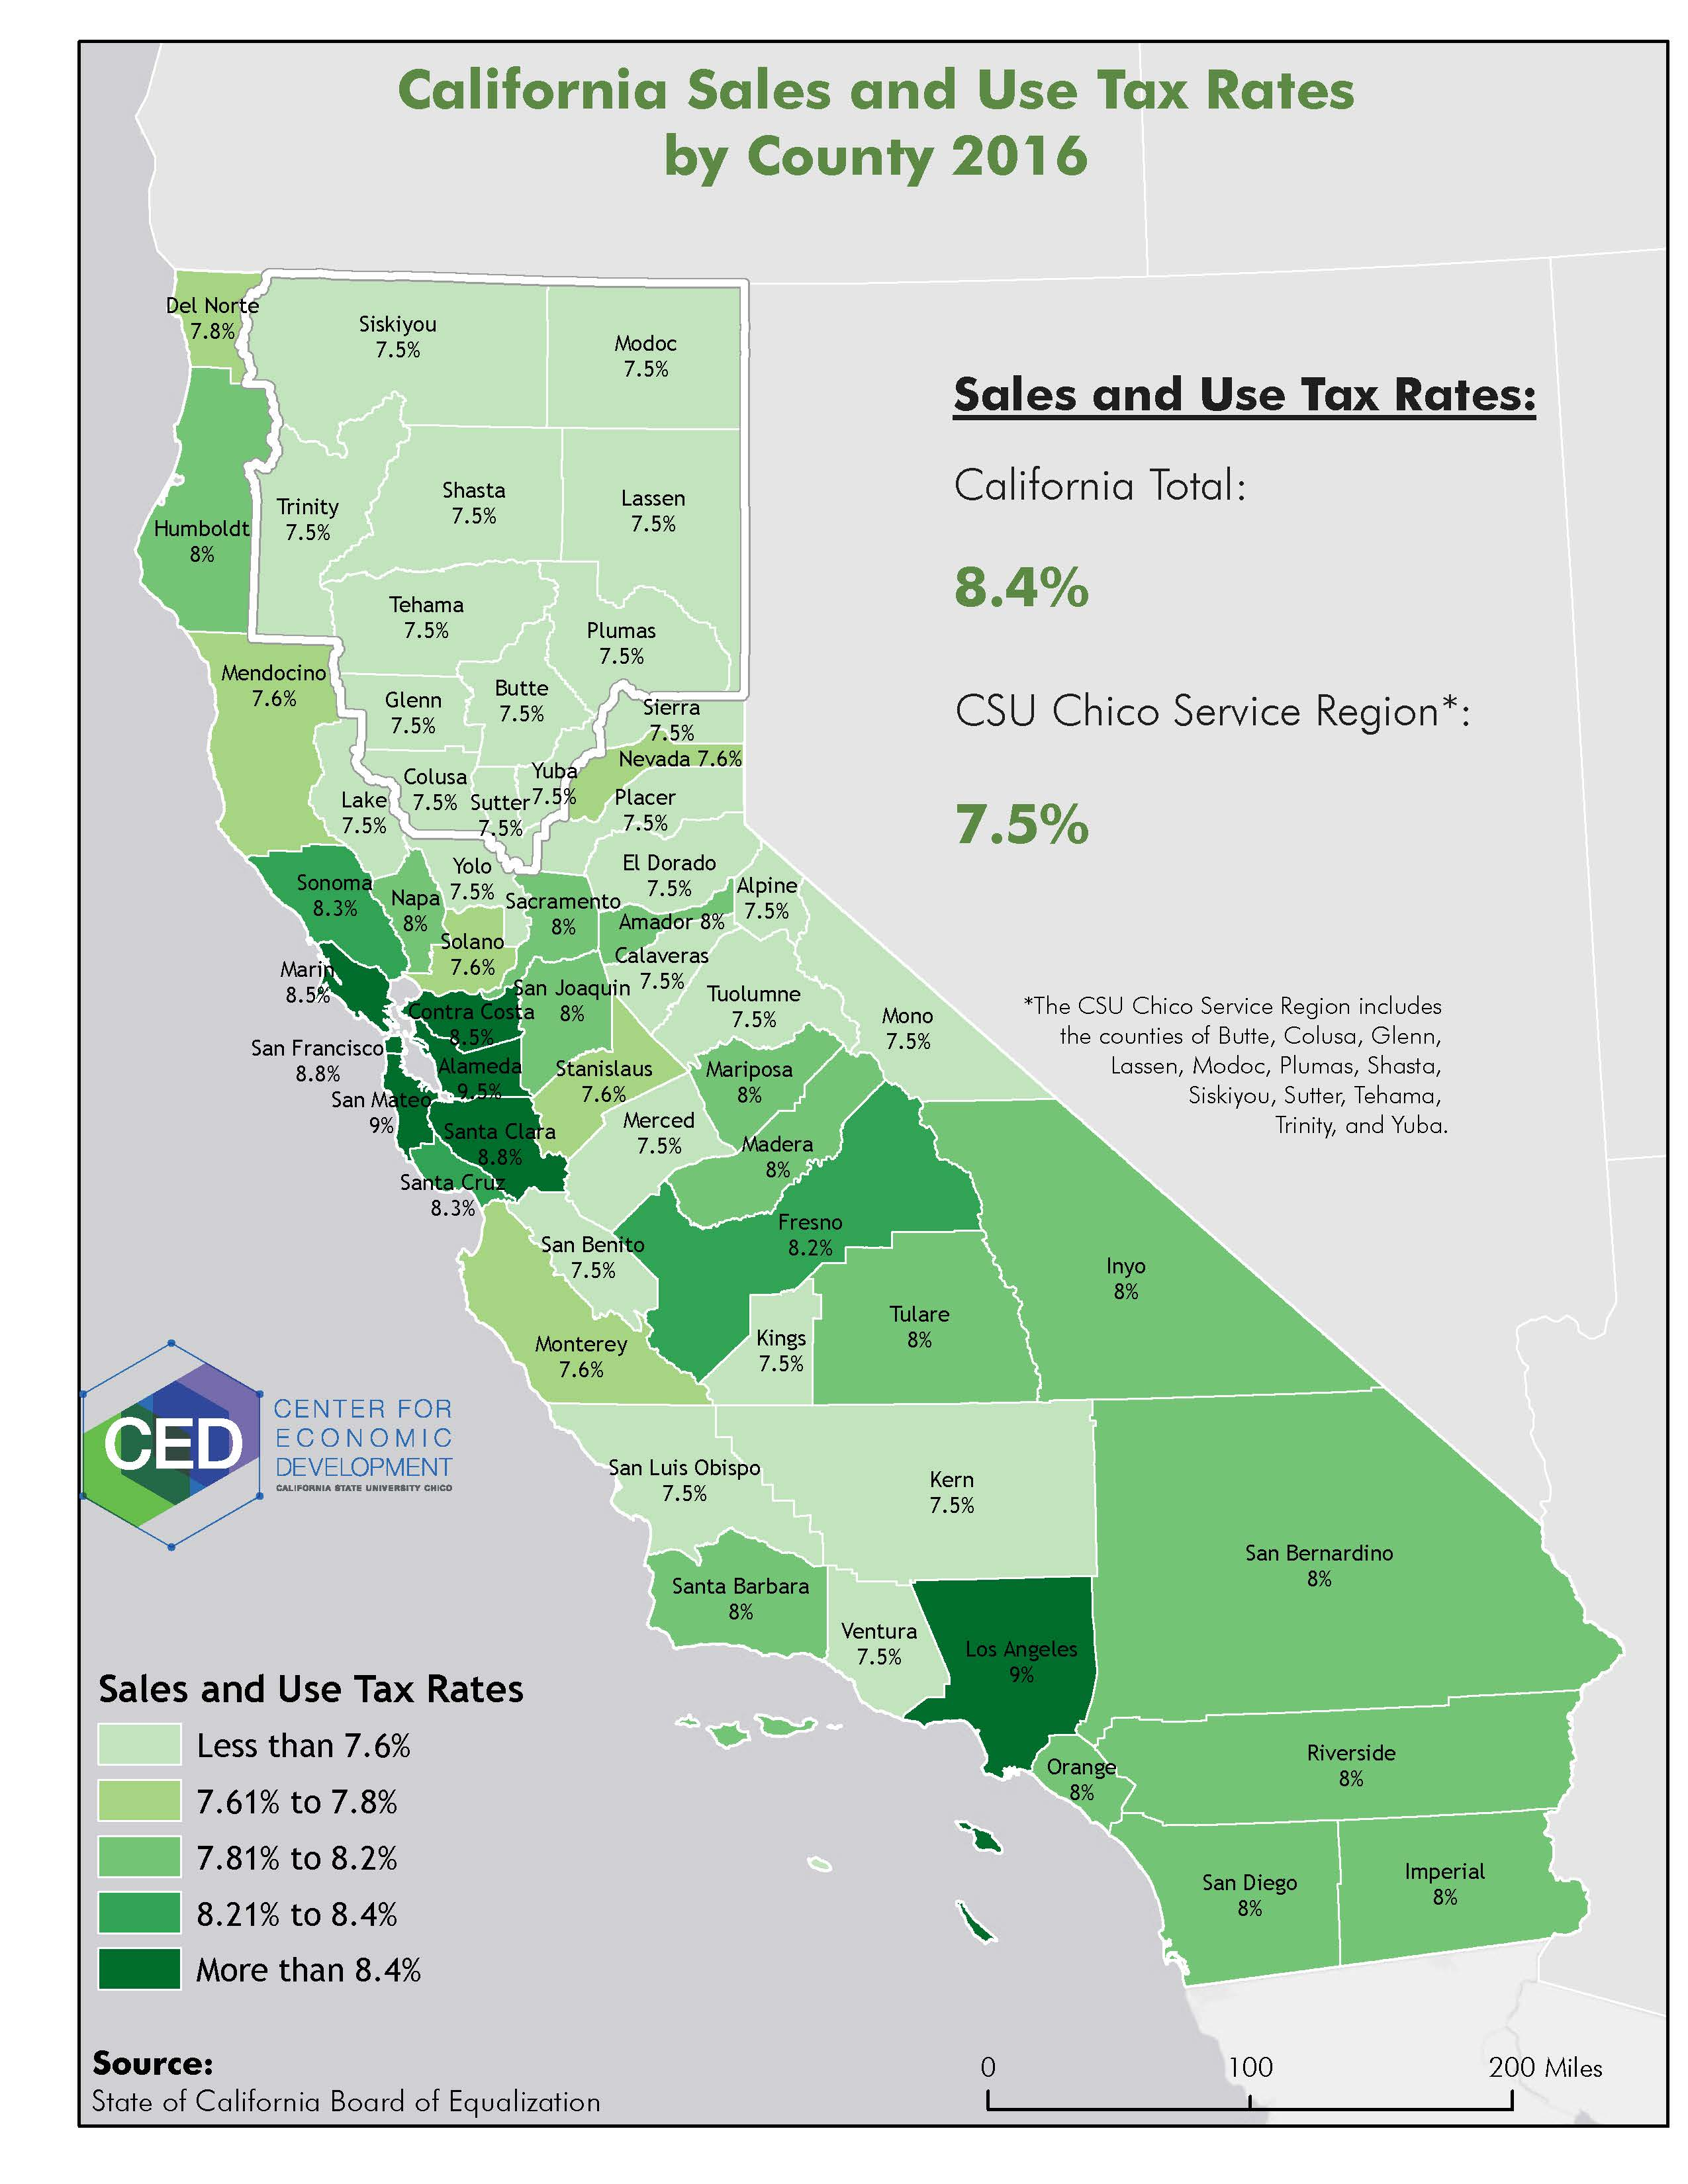 Sales Tax Draft Road Maps Where Is Chico California On The Map - California Sales Tax Map